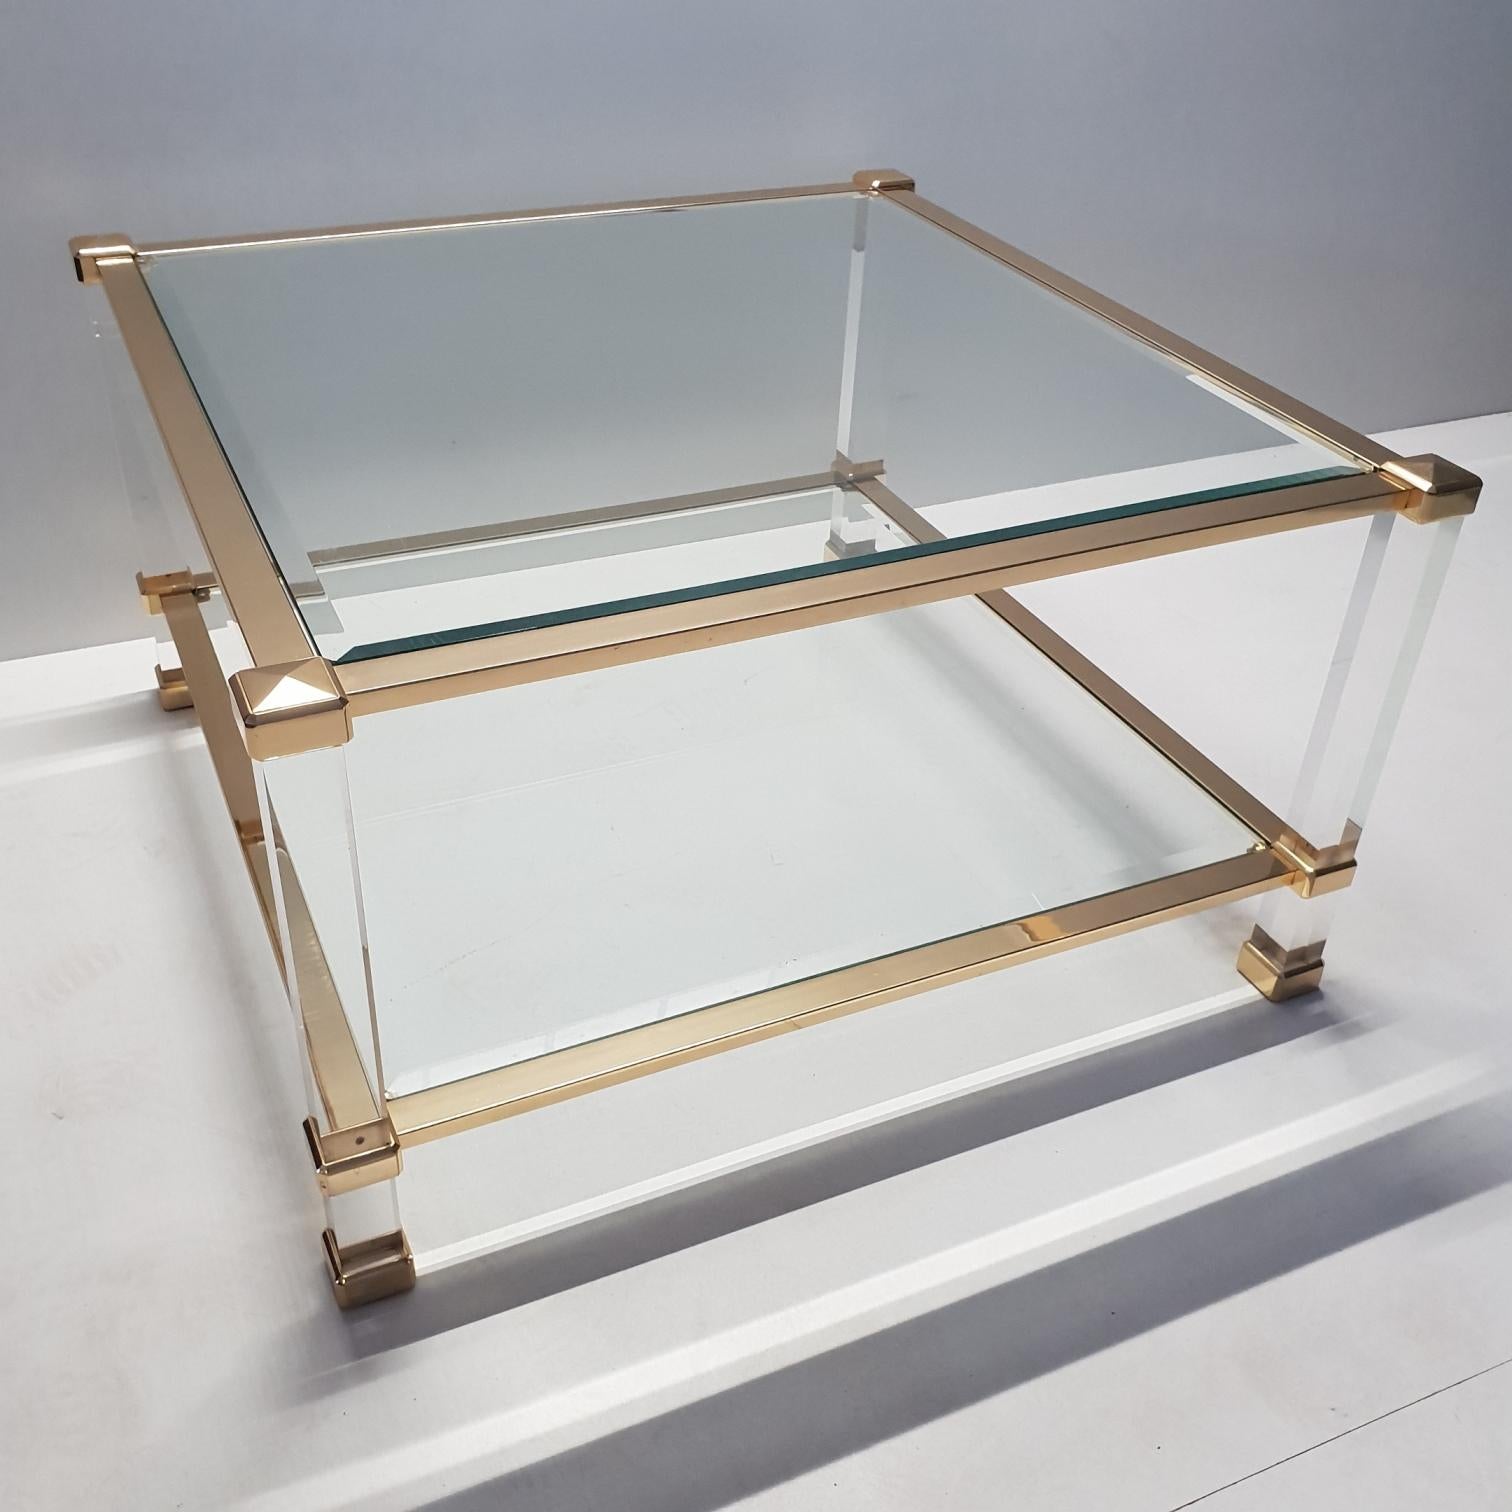 Hollywood Regency Italian Lucite and Brass Square Coffee Table by Orsenigo 'Marked', 1970s